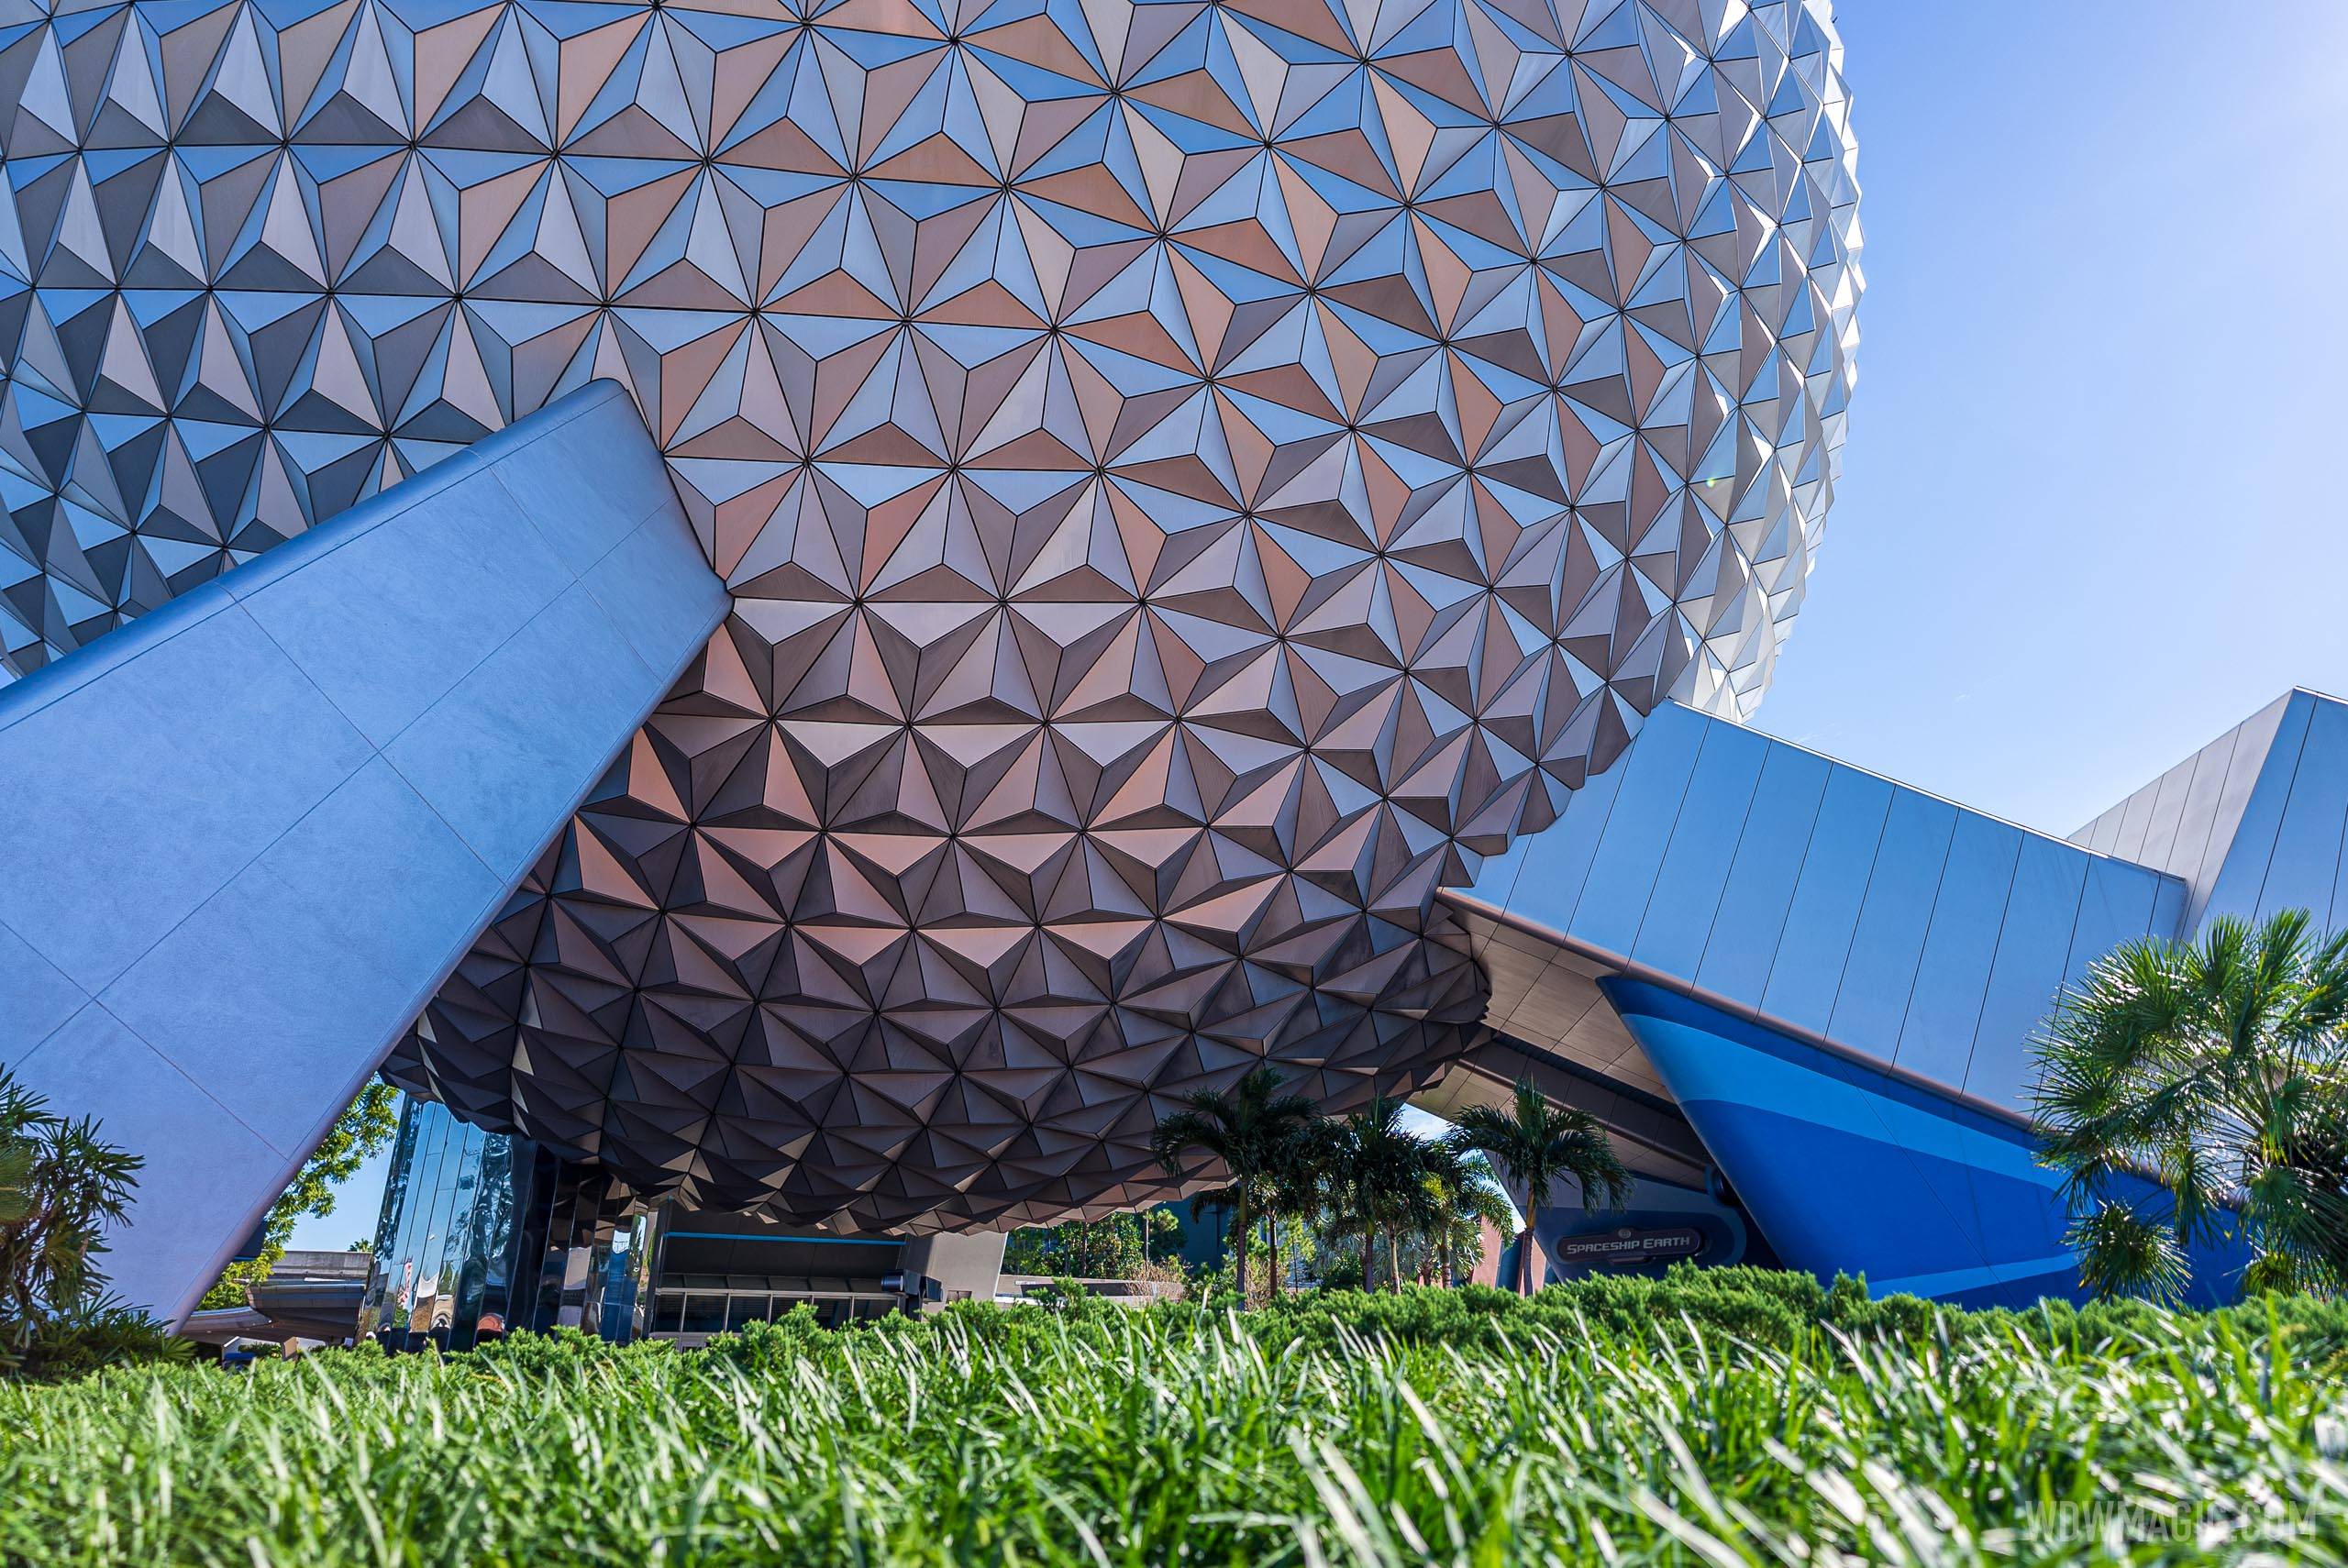 Spaceship Earth overview